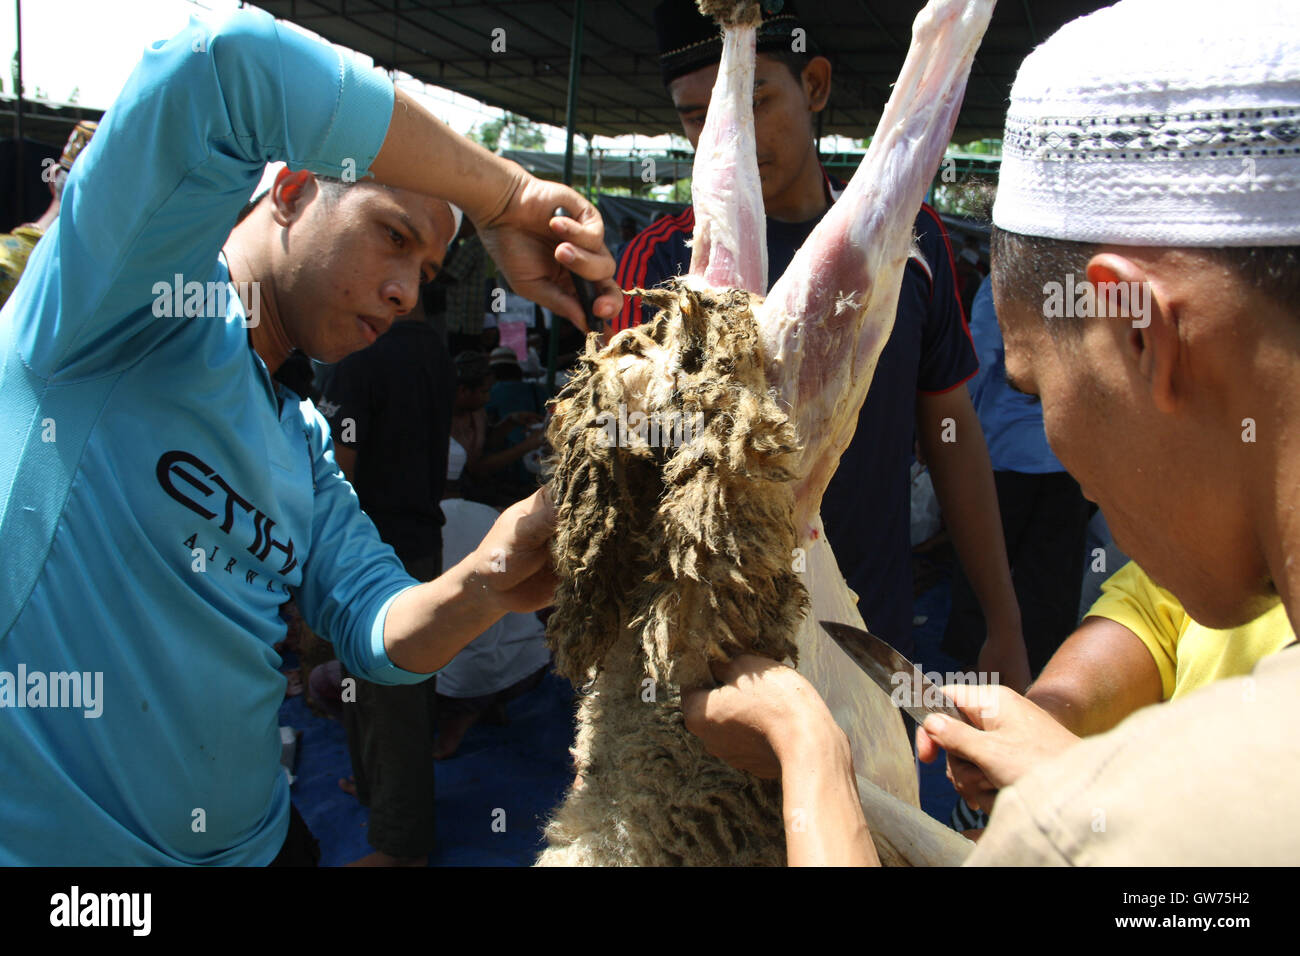 Medan, North Sumatra, Indonesia. 12th Sep, 2016. NORTH SUMATRA, INDONESIA - SEPTEMBER 12 : Indonesia muslim cut goat skin during the celebration of Eid al-Adha at Al-Mudziri islamic boarding school on September 12, 2016 in Medan, North Sumatra Province, Indonesia. Muslims worldwide celebrate Eid Al-Adha, to commemorate the holy Prophet Ibrahim's (Prophet Abraham) readiness to sacrifice his son as a sign of his obedience to God, during which they sacrifice permissible animals, generally goats, sheep, and cows. Eid-al Adha is the one of two most important holidays in the Islamic calendar, Stock Photo